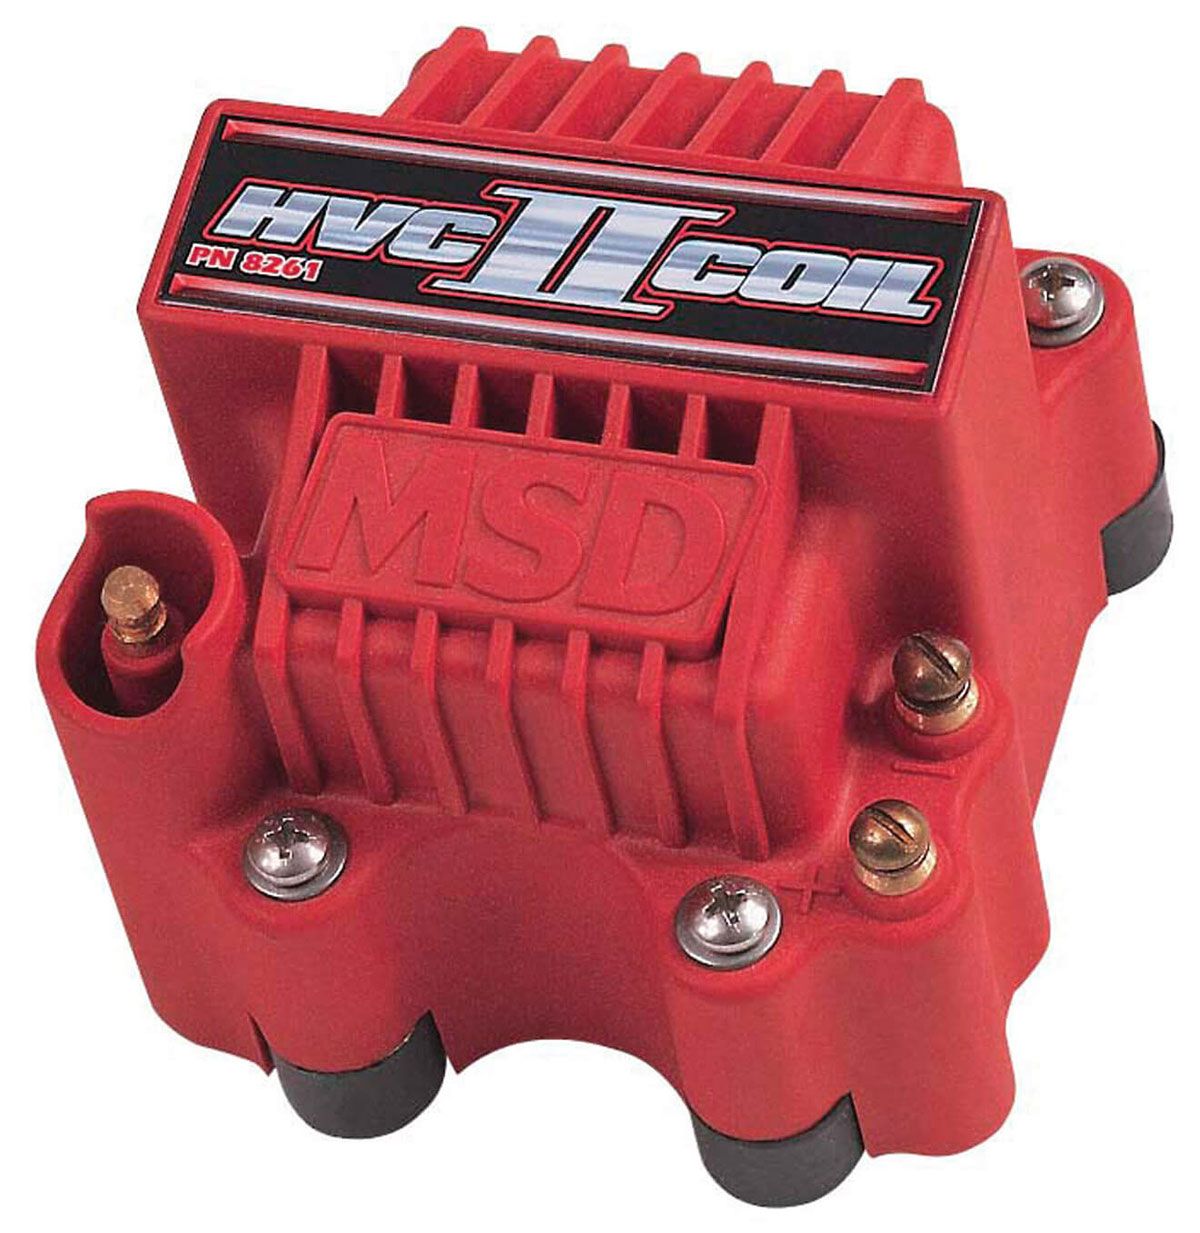 MSD8261 -  HVC Pro Power II Coil For use with MSD 7 and 8 Series Ignition Controls, 45,000 volts